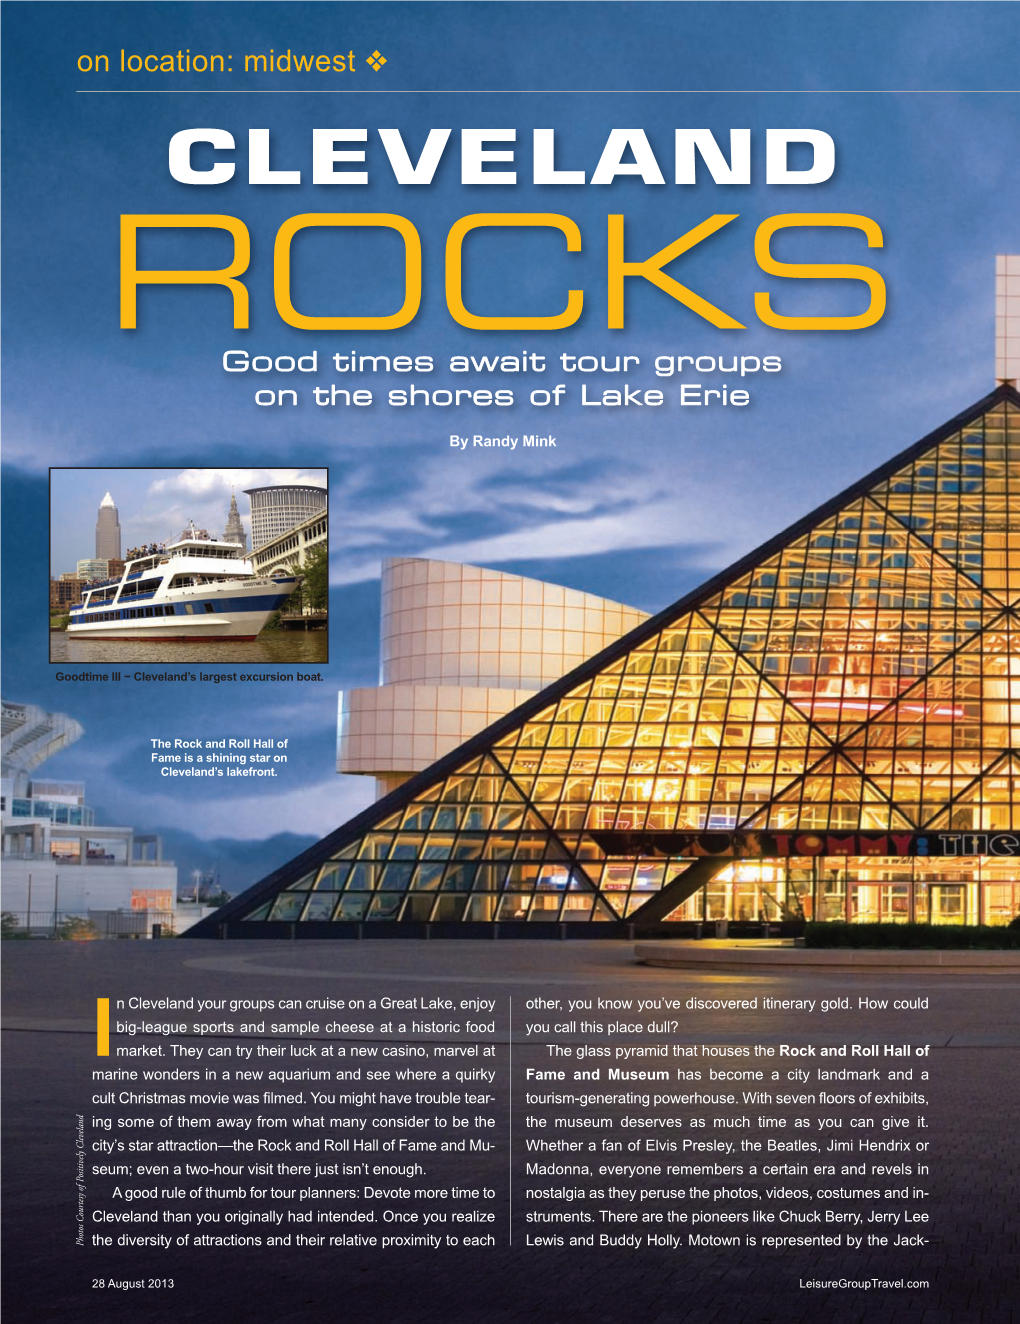 CLEVELAND ROCKS Good Times Await Tour Groups on the Shores of Lake Erie